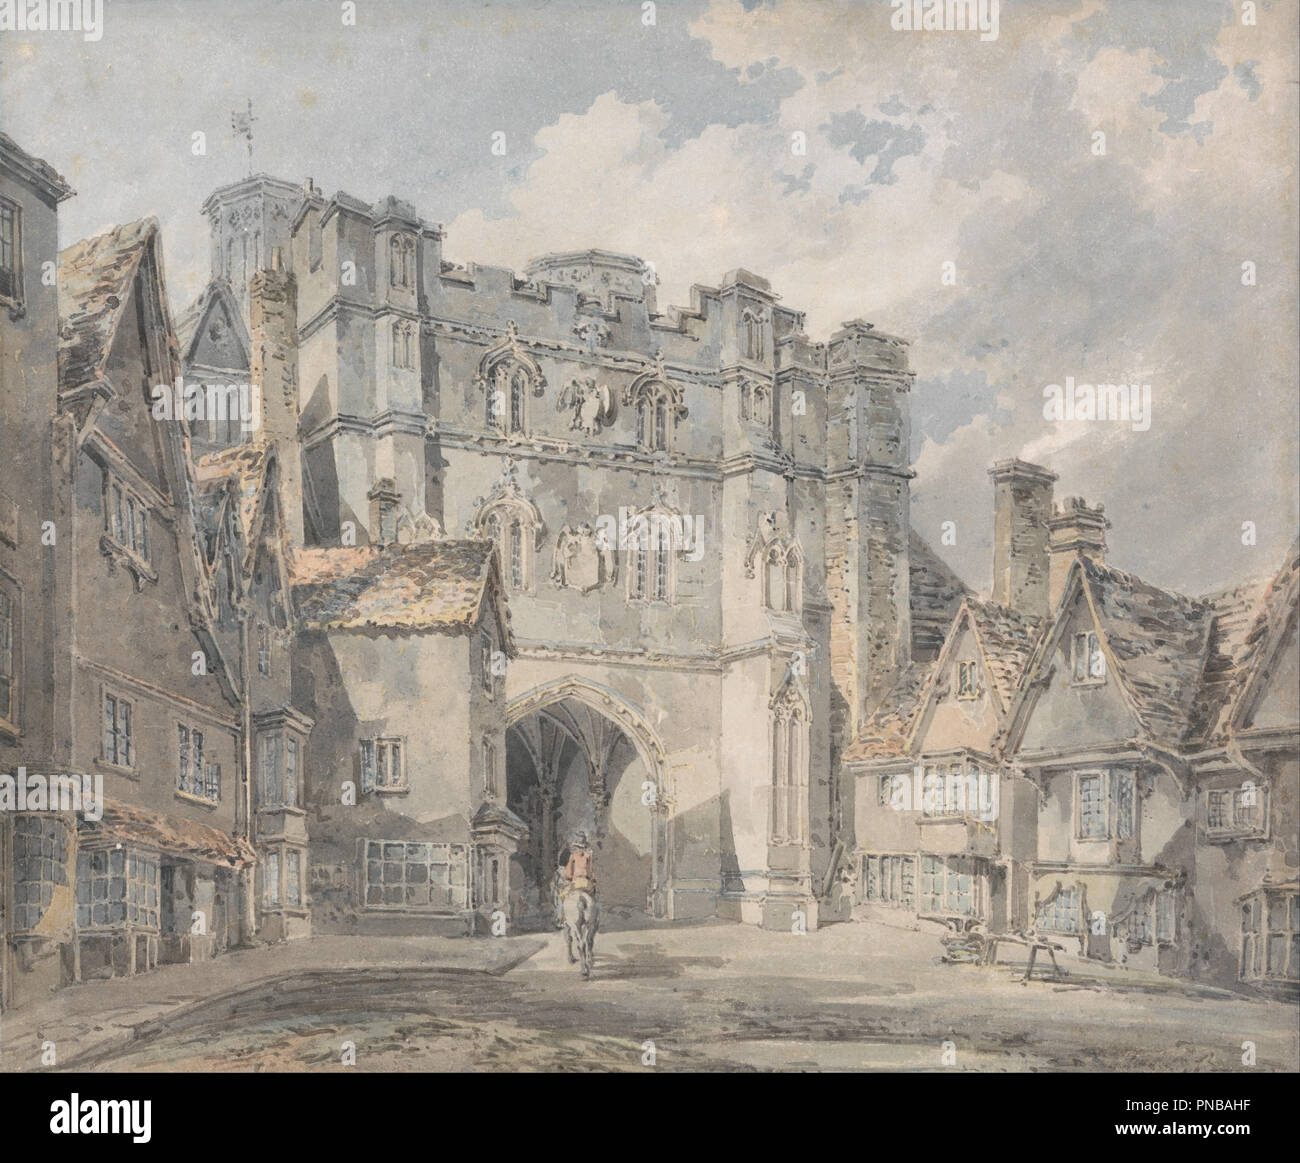 Christ Church Gate, Canterbury. Date/Period: 1793 to 1794. Painting. Watercolor. Height: 225 mm (8.85 in); Width: 273 mm (10.74 in). Author: J. M. W. Turner. Stock Photo